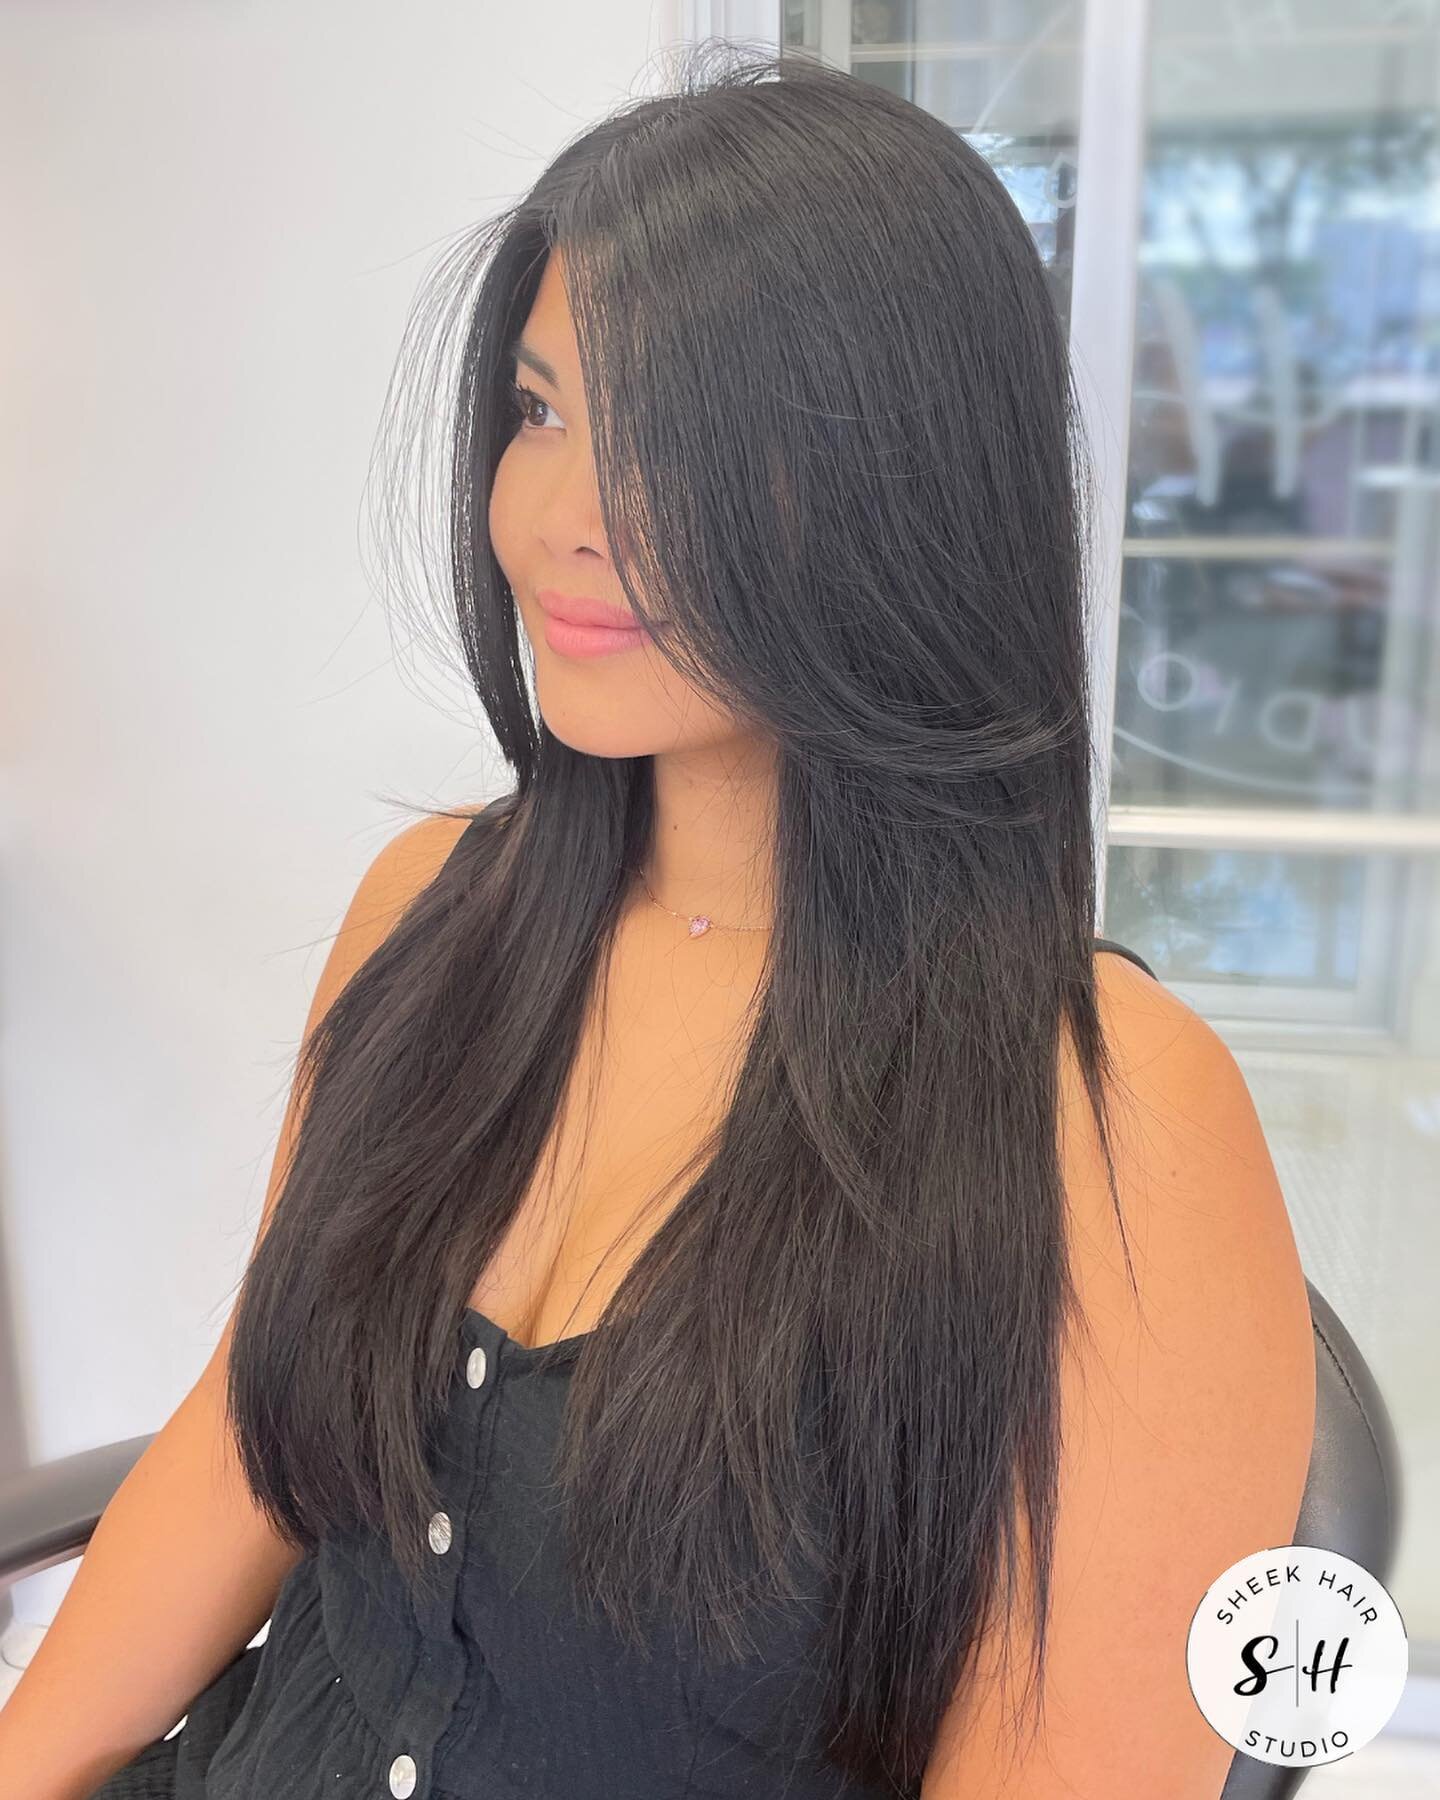 Book your Brazilian Blowout Today to:⠀
⠀
1️⃣ Smooth &amp; eliminate frizz for up to 12 weeks ⠀
2️⃣ Improve overall condition of the hair ⠀
3️⃣ Cut styling time in half ⠀
4️⃣ Great for ALL hair types ⠀
5️⃣ Protects strands against fluctuating temperat